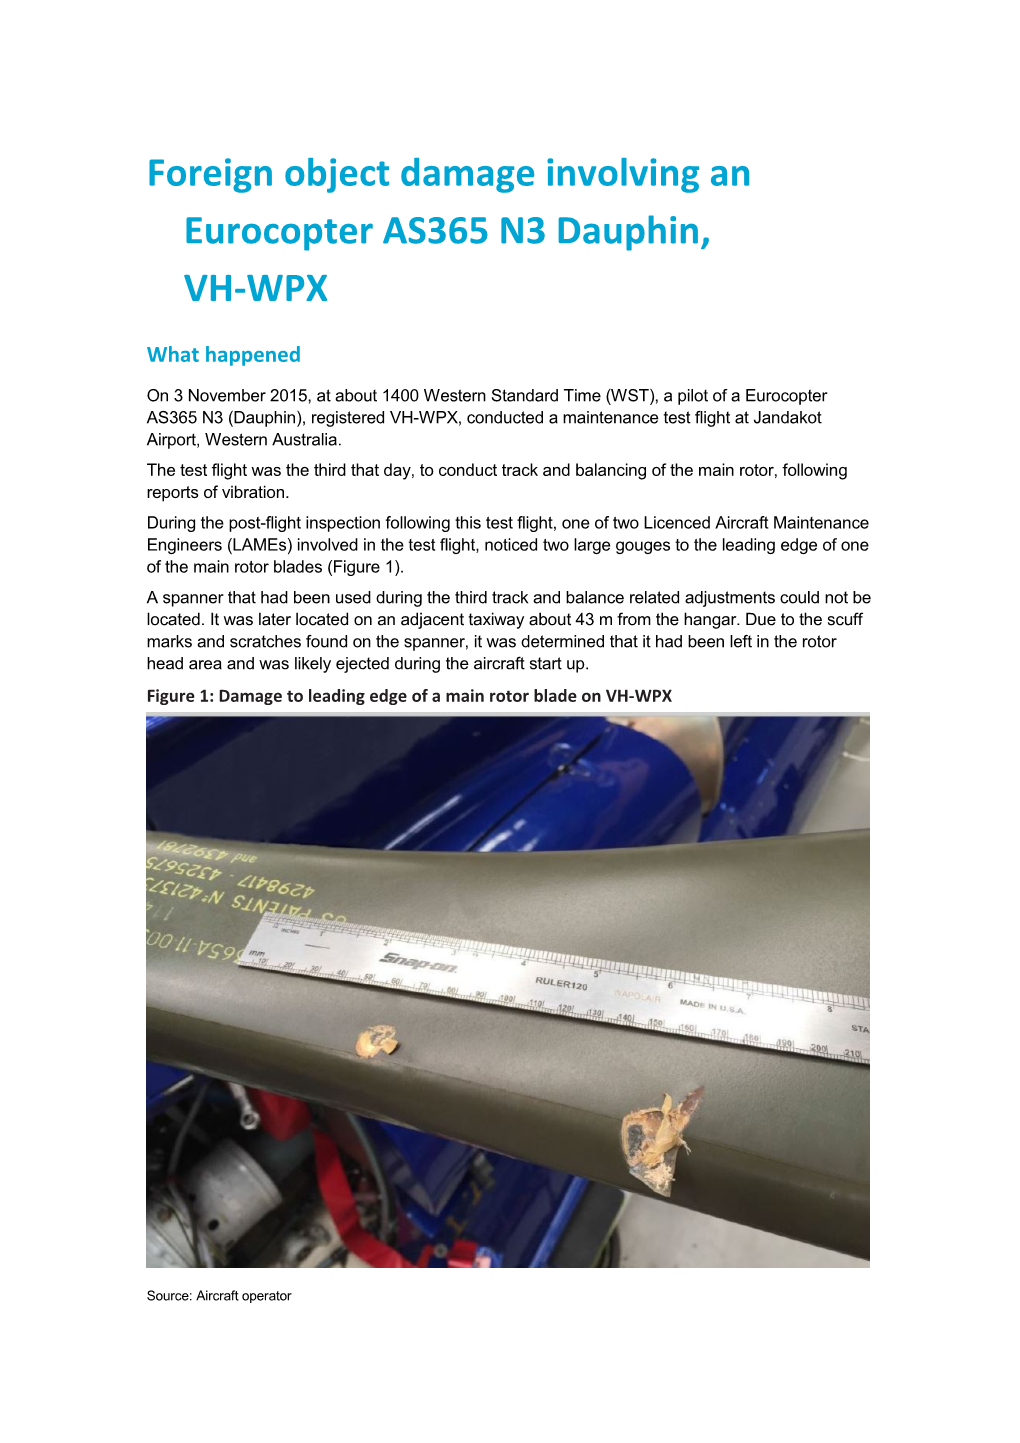 Foreign Object Damage Involving an Eurocopter AS365 N3 Dauphin, VH-WPX